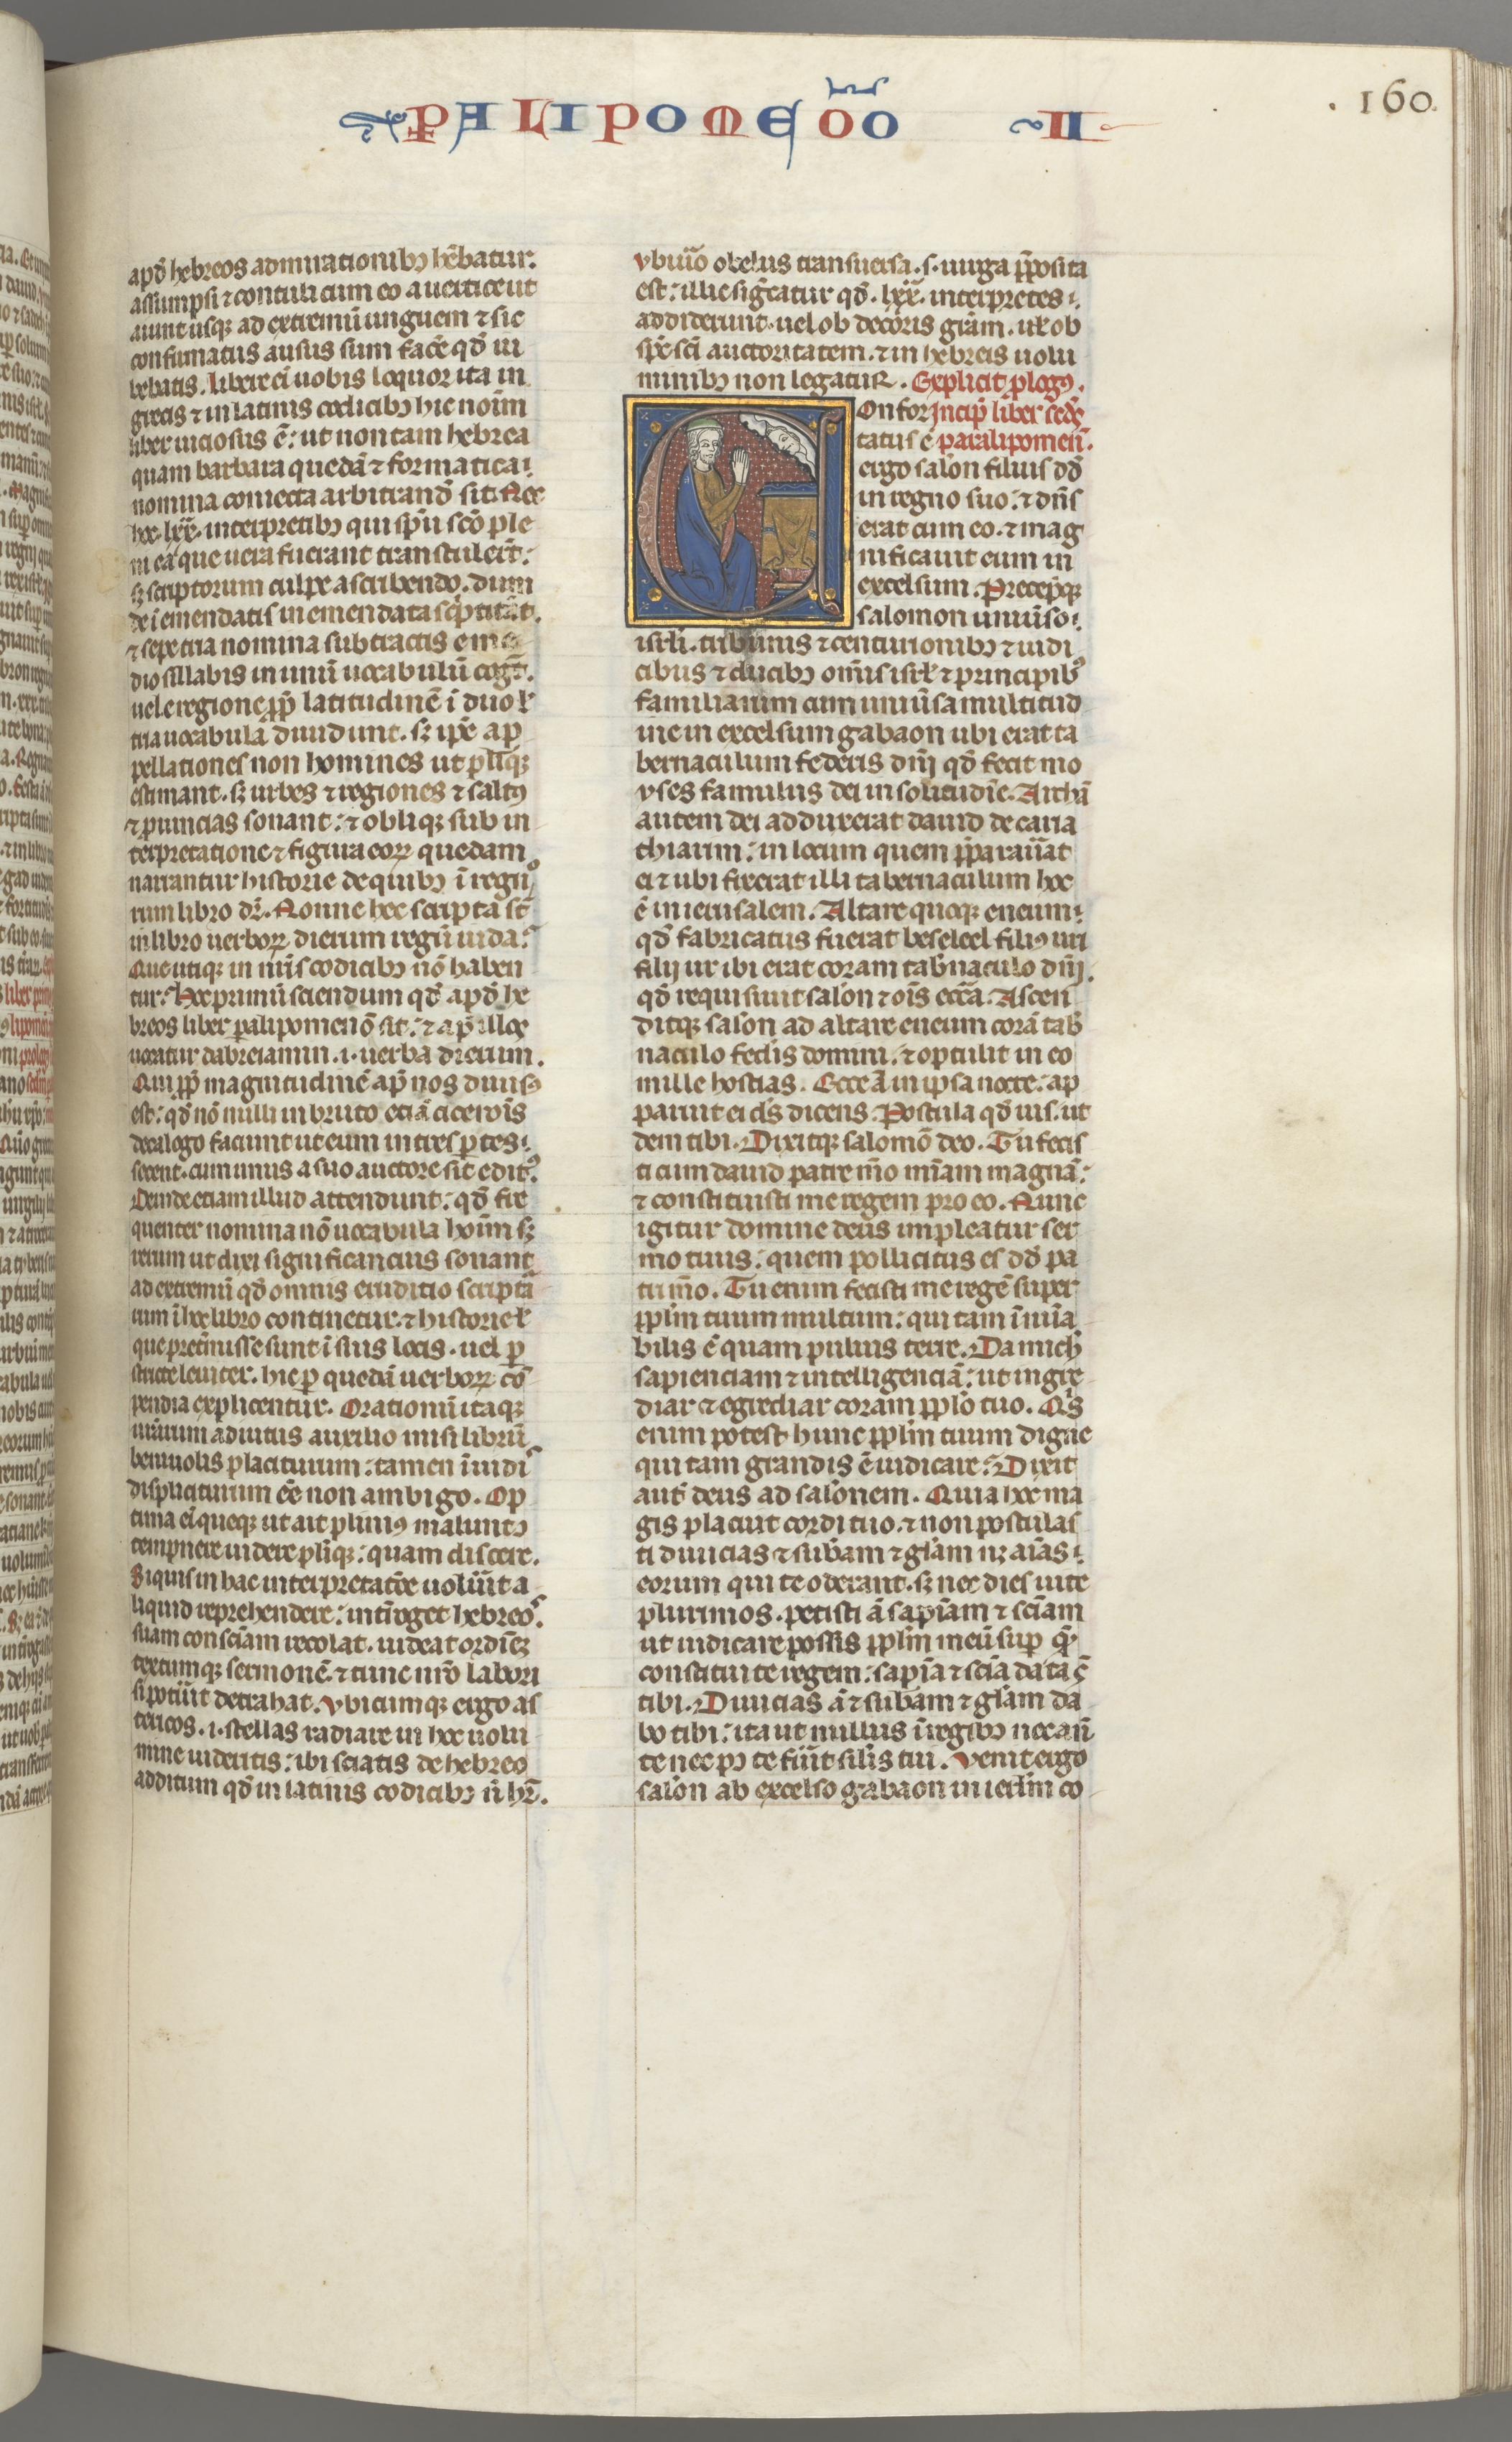 Fol. 160r, Chronicles II, historiated initial C, Solomon kneeling before an altar praying, a bust of God above